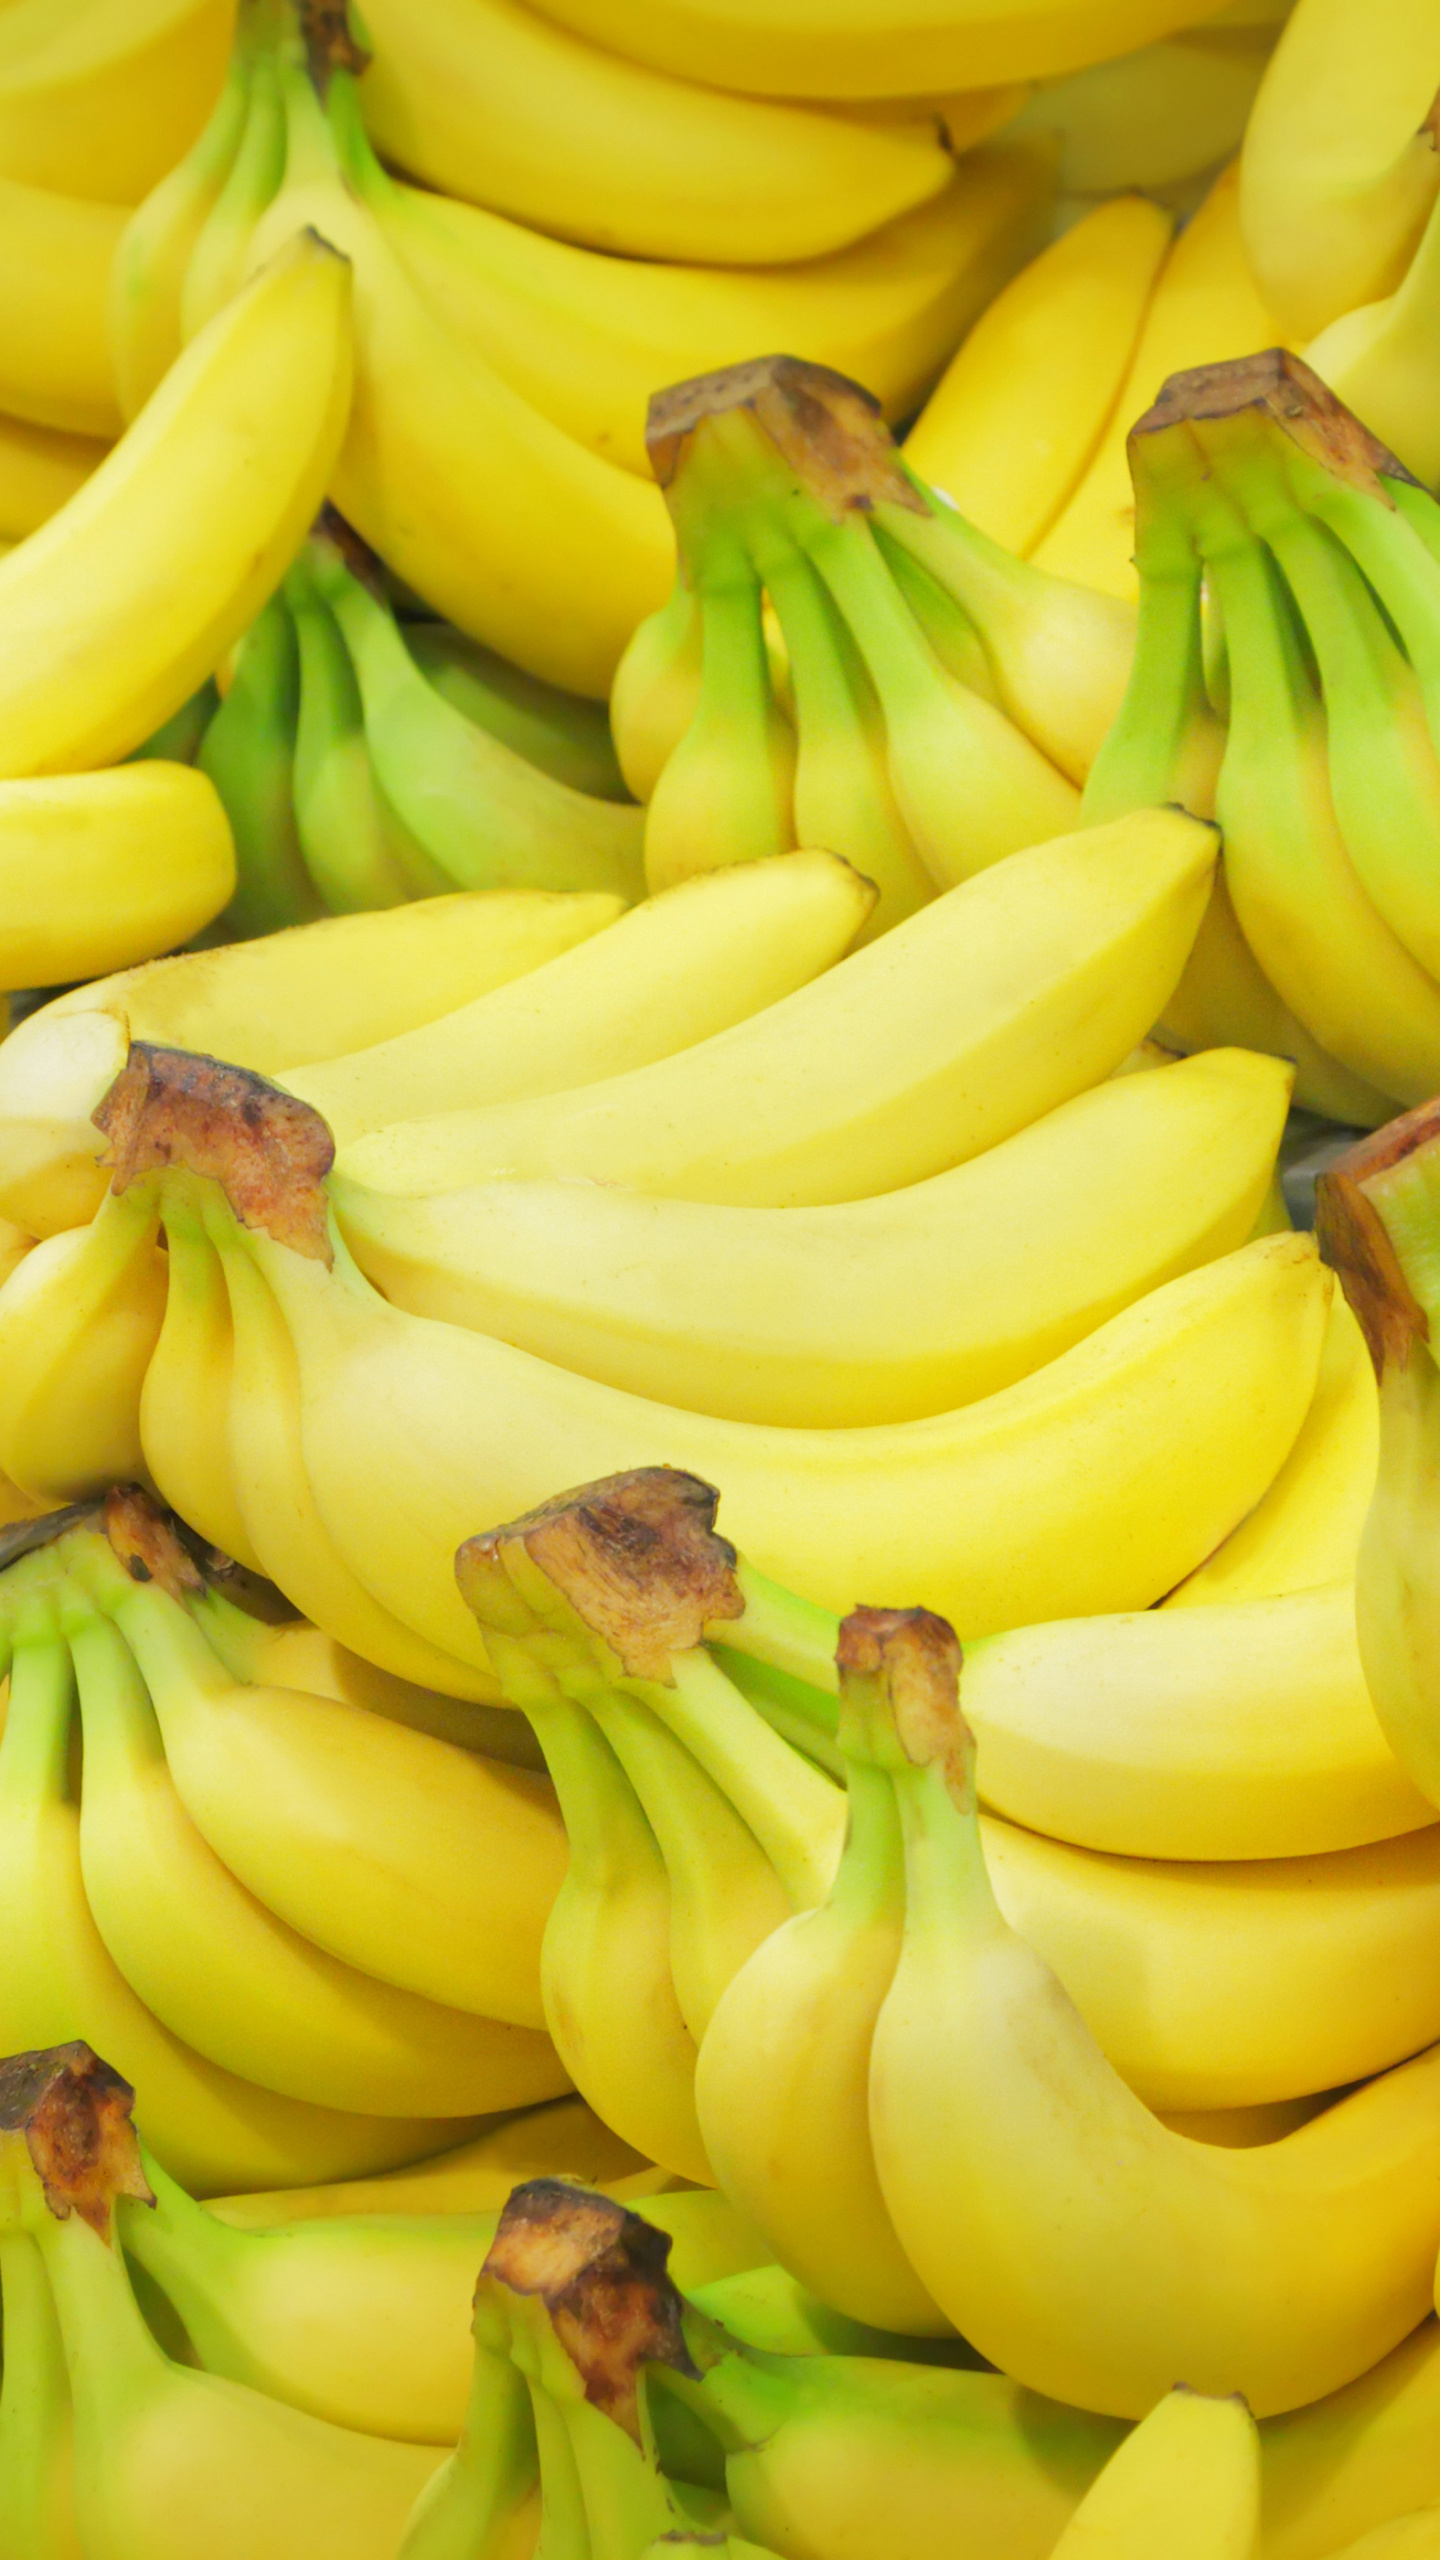 Banana feast, Culinary delight, Nutritious goodness, Finger-licking satisfaction, 1440x2560 HD Handy